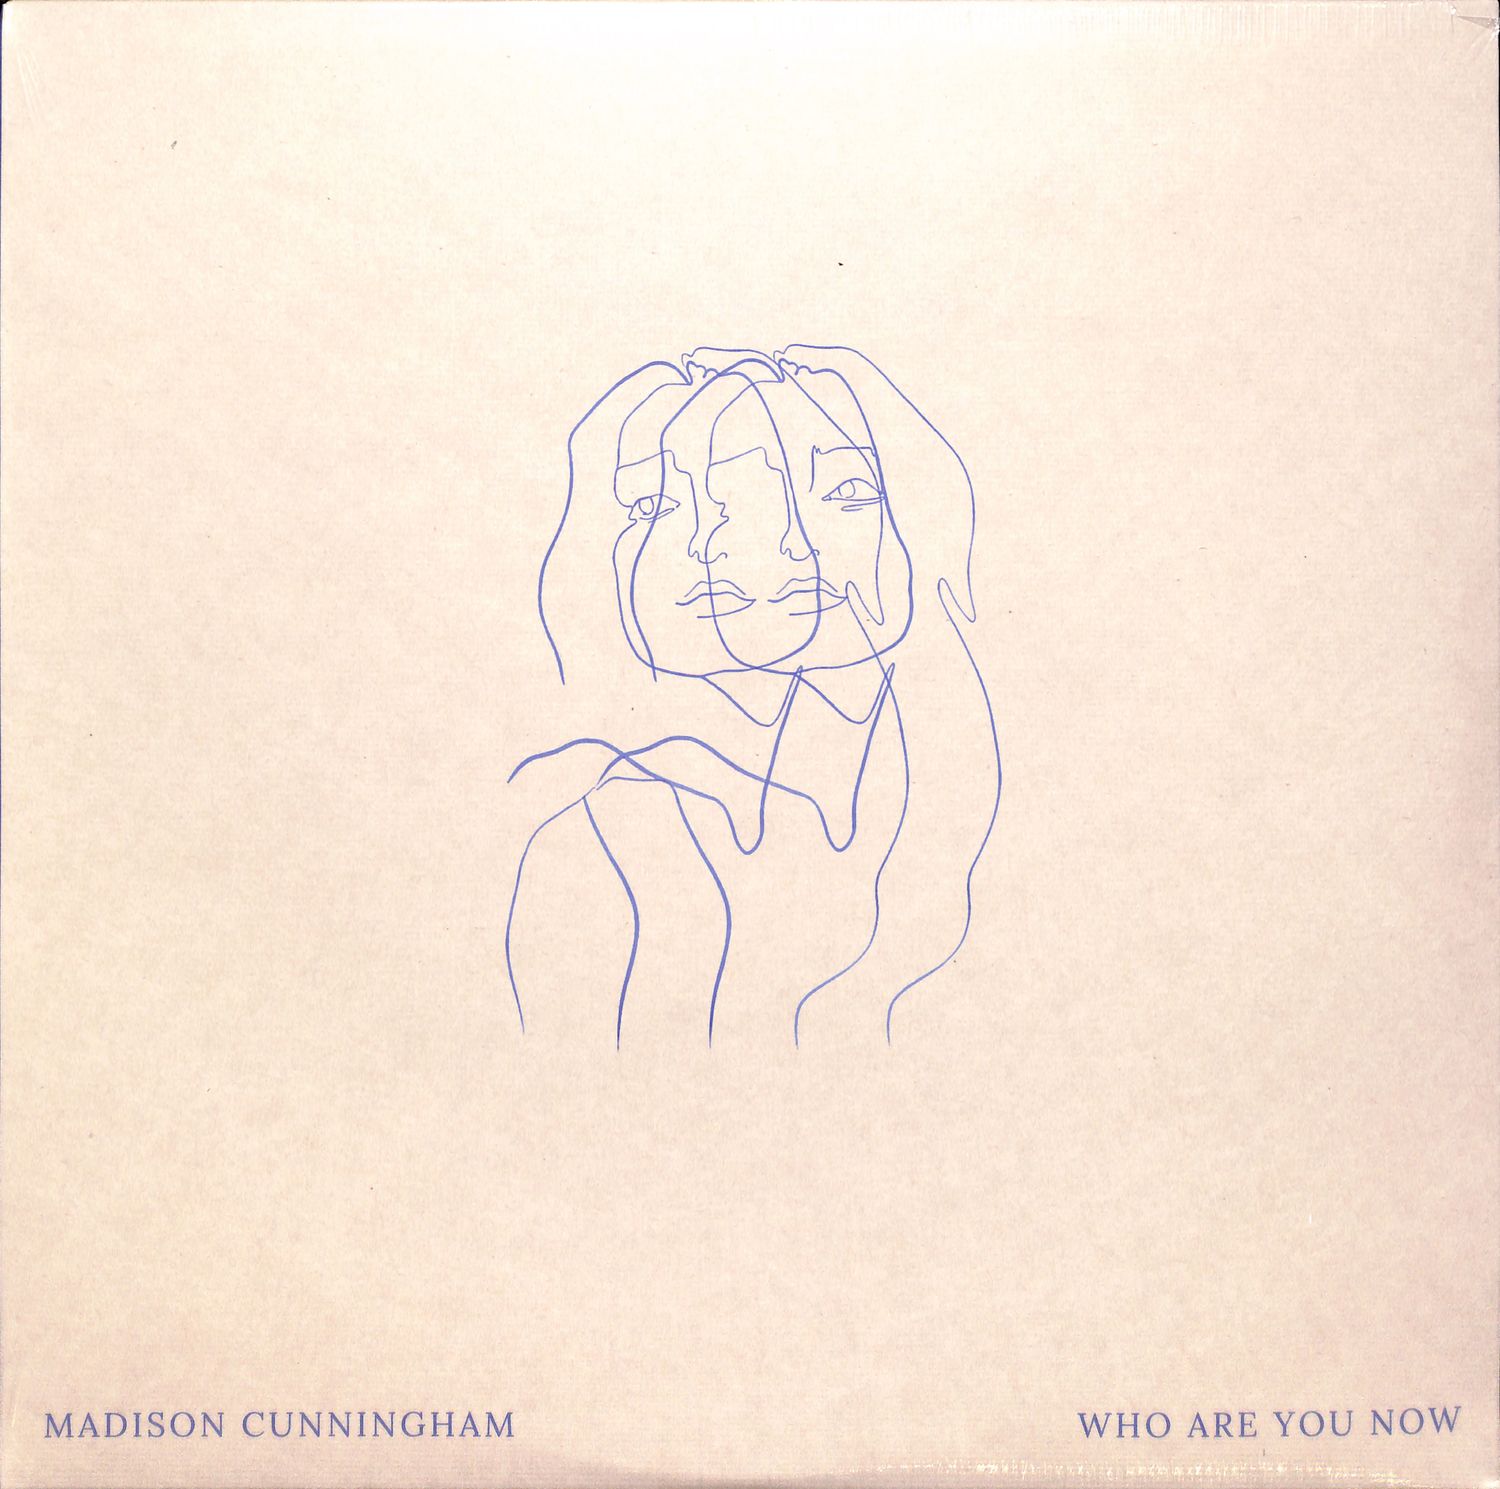 Madison Cunningham - WHO ARE YOU NOW 